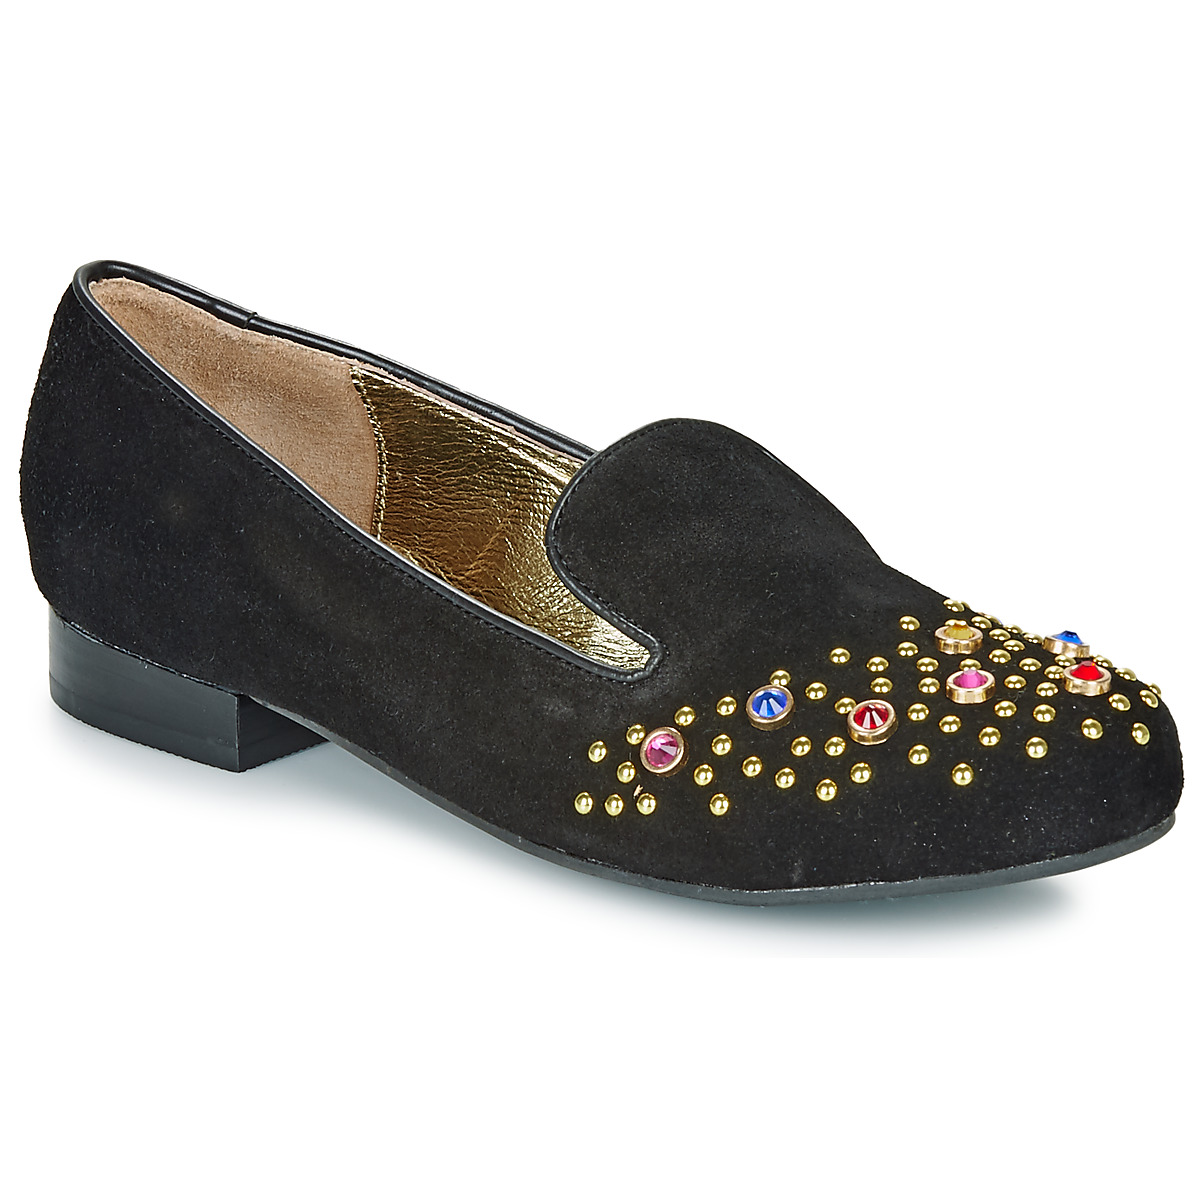 Lola Ramona PENNY Black / Gold - Free delivery | Spartoo NET ! - Shoes Smart-shoes Women